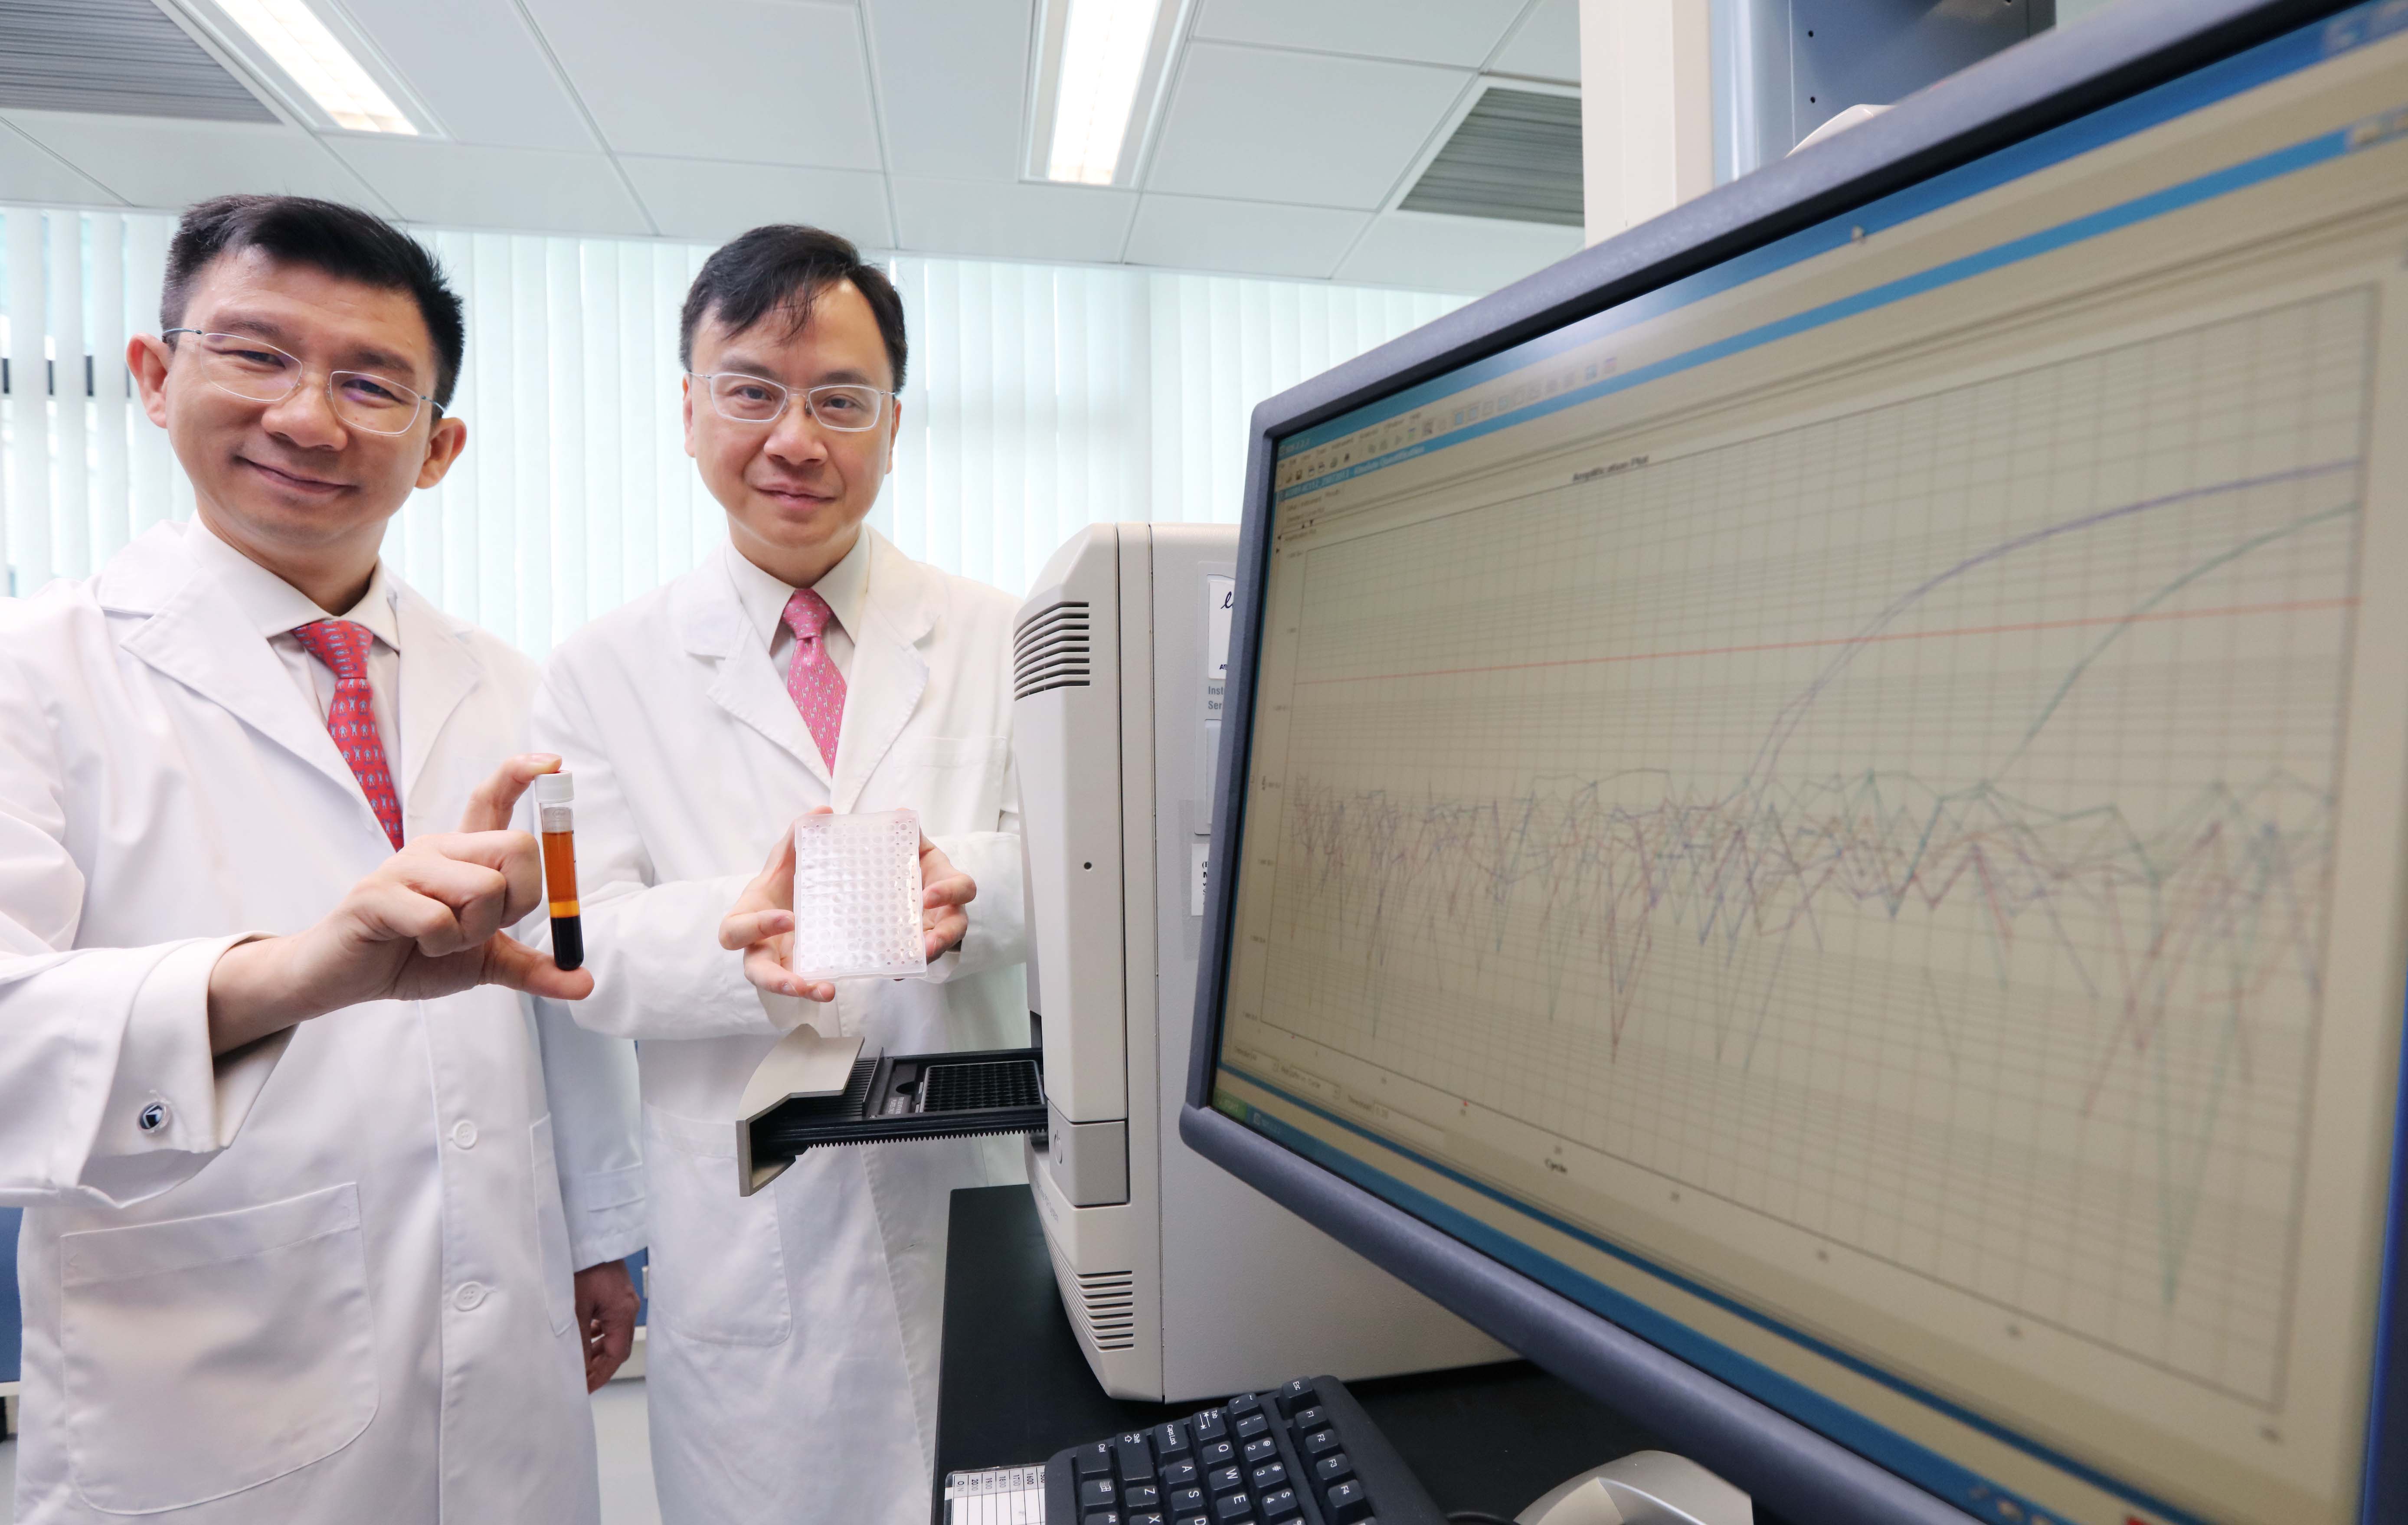  (Right) Professor Dennis LO, Director of the Li Ka Shing Institute of Health Sciences at CUHK, and Professor Allen CHAN from the Department of Chemical Pathology, Faculty of Medicine at CUHK.